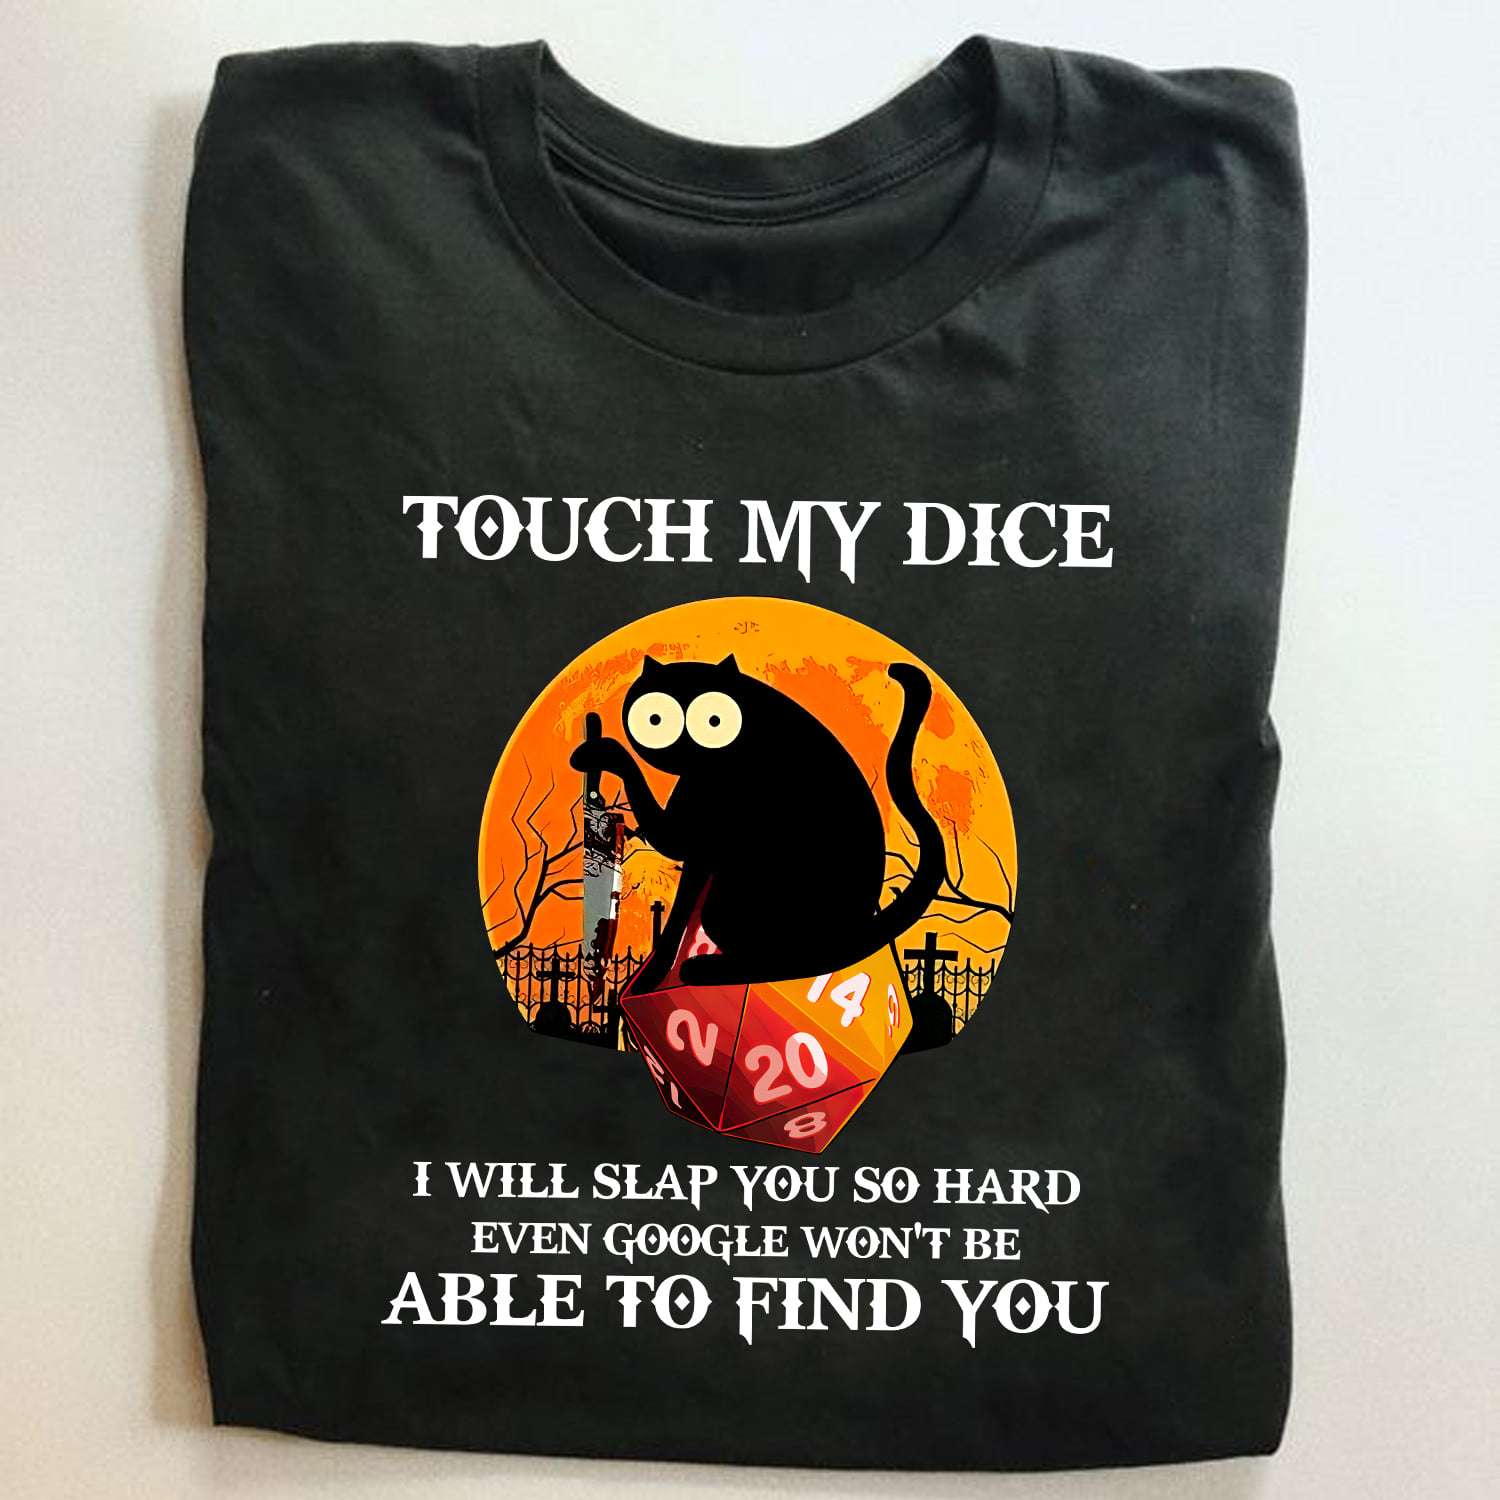 Touch my dice I will slap you so hard - Black cat killer, Dungeons and Dragons